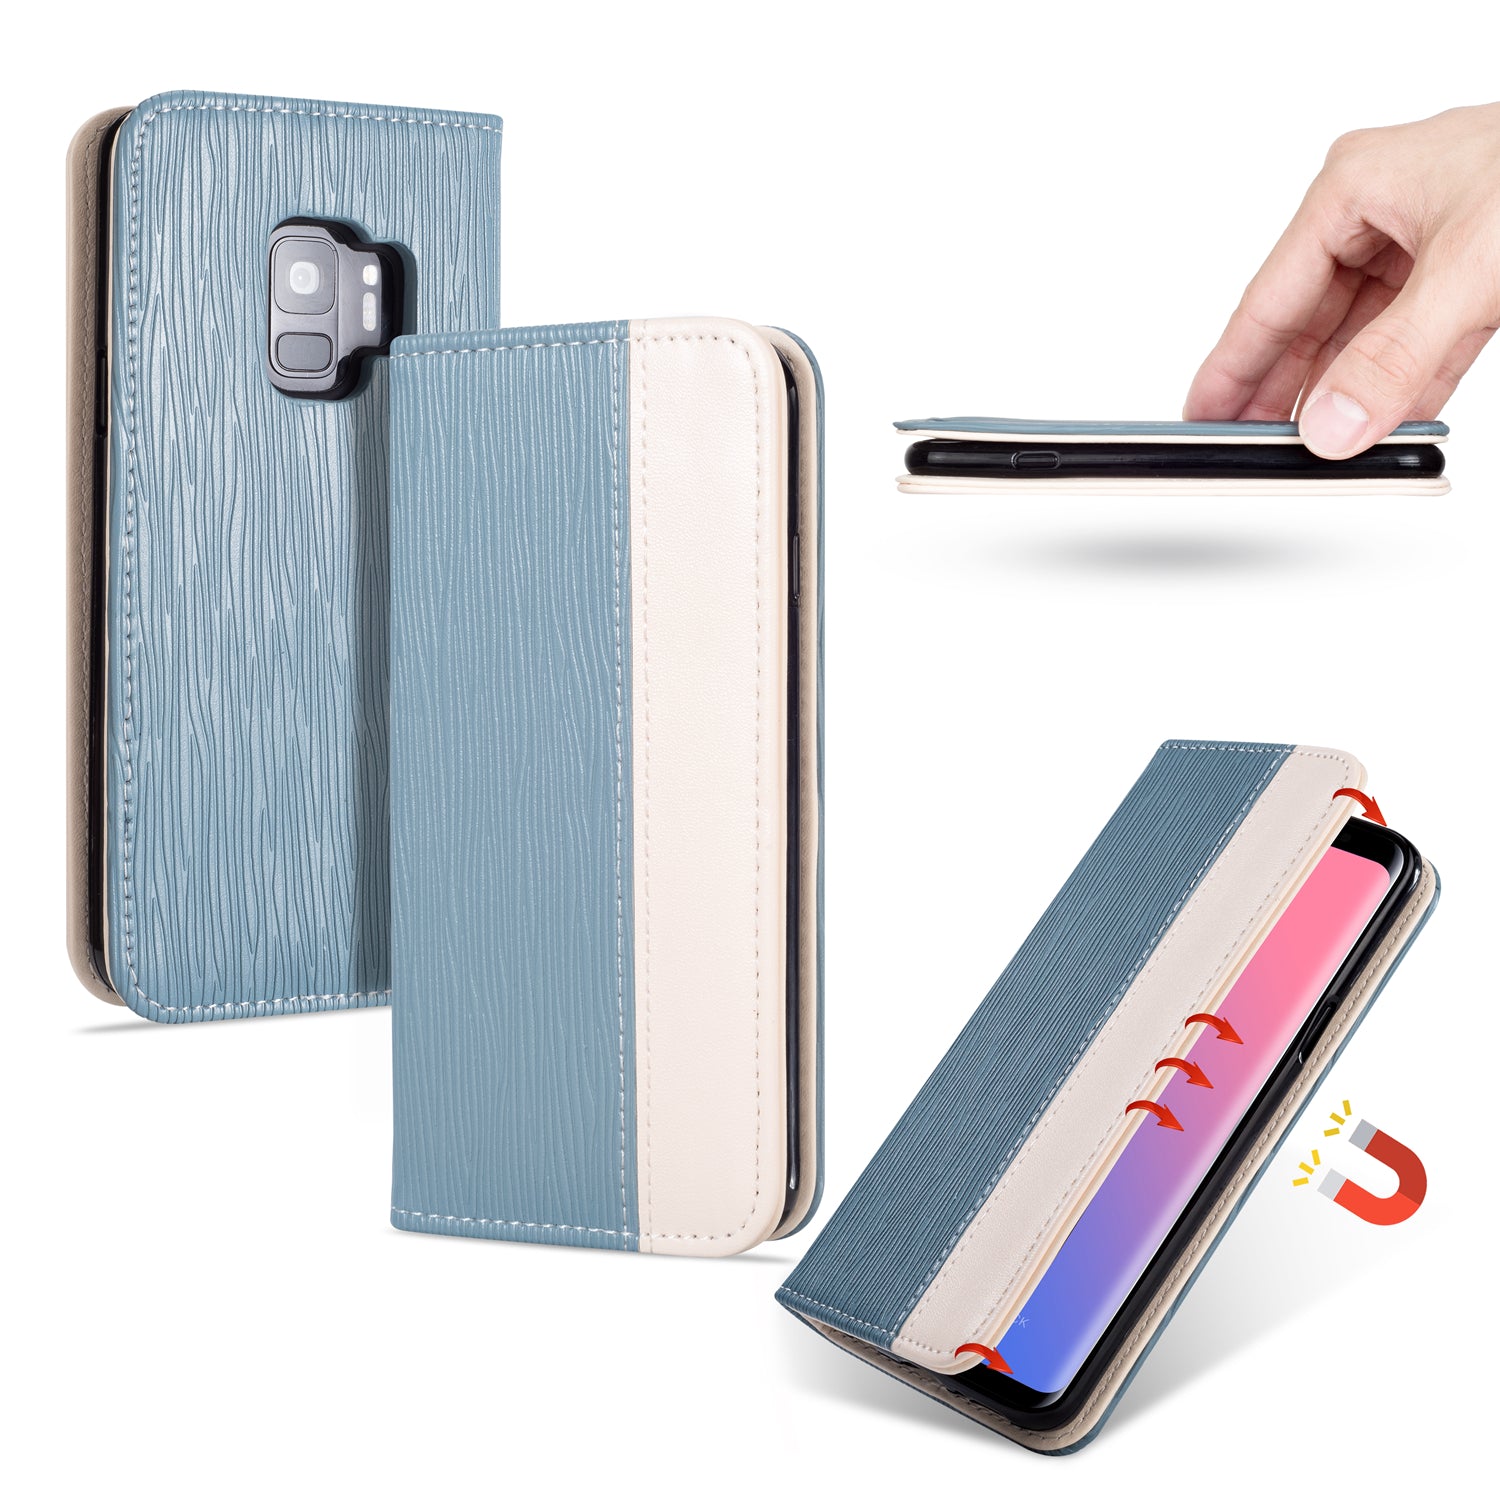 Bakeey Premium Magnetic Flip Card Slot Kickstand Protective Case For Samsung Galaxy S9